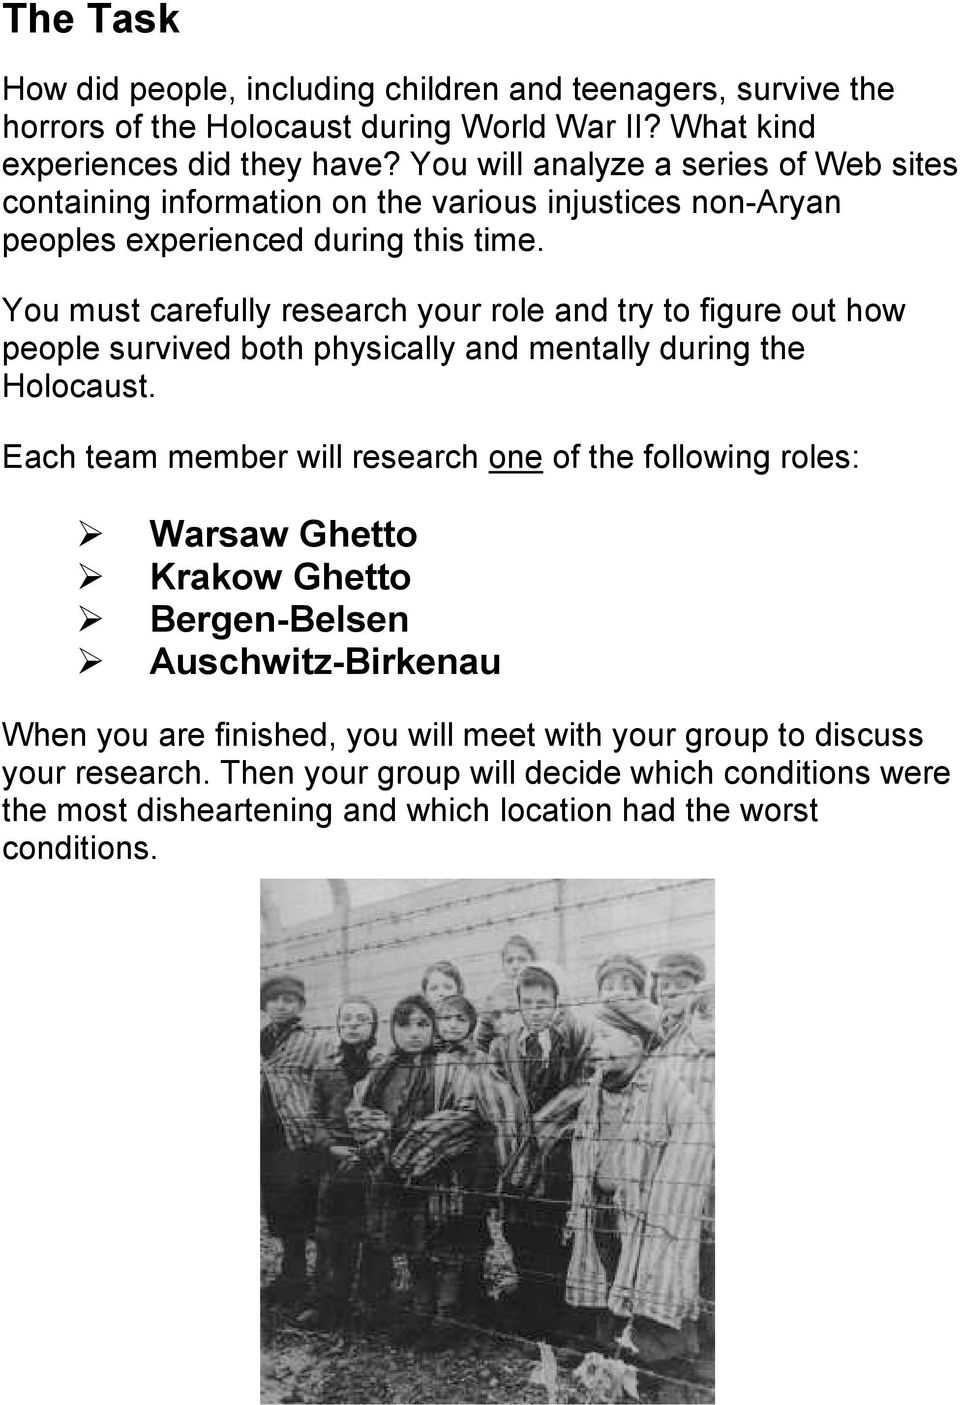 You must carefully research your role and try to figure out how people survived both physically and mentally during the Holocaust.